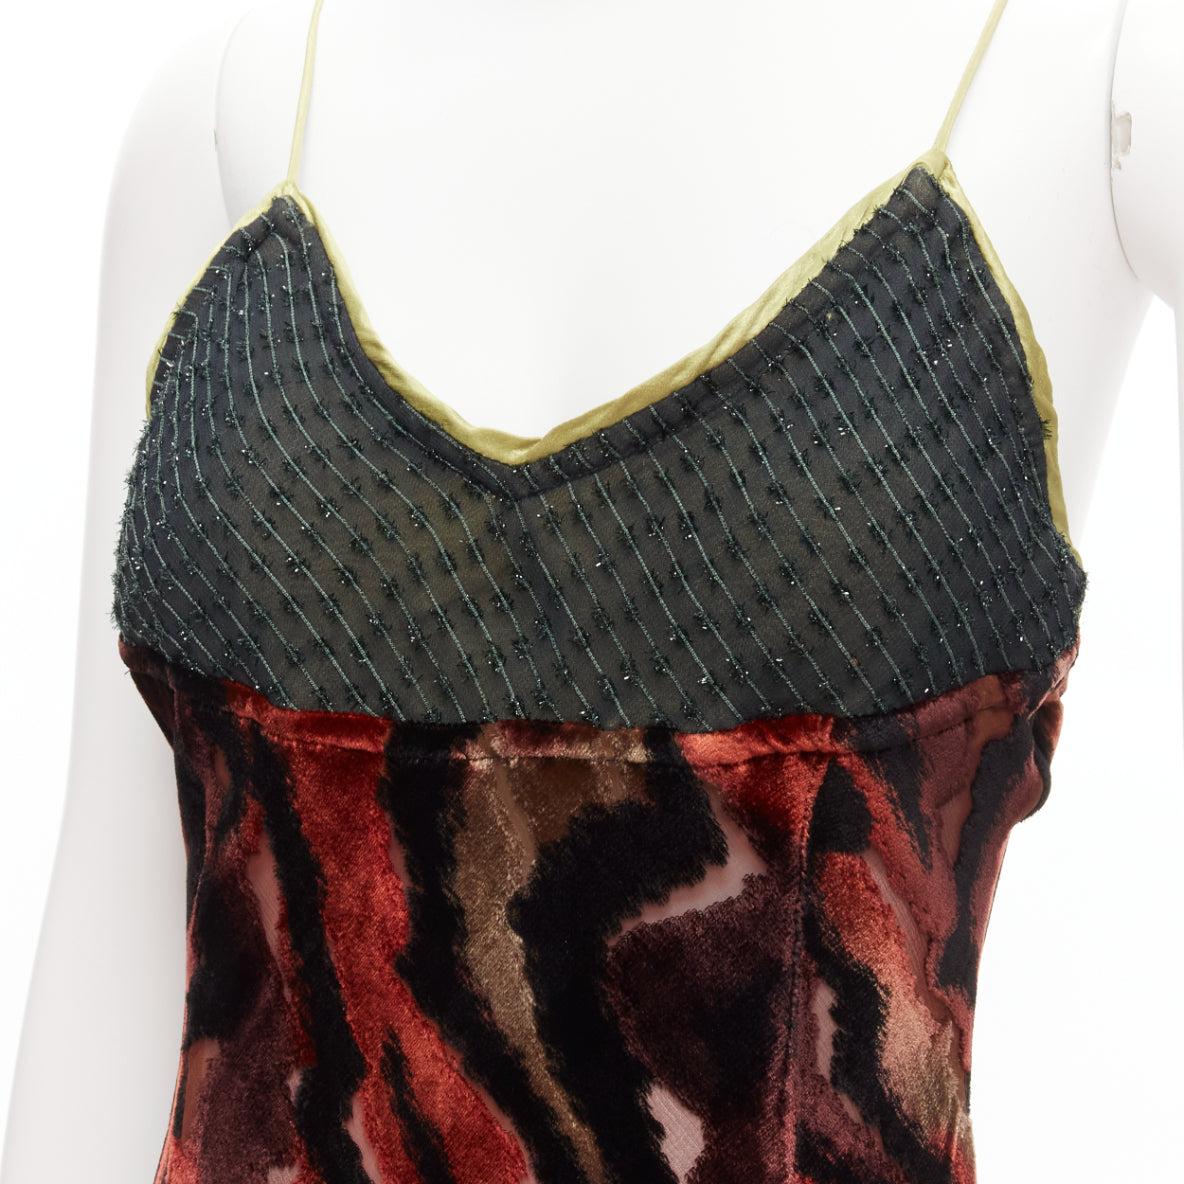 VOYAGE INVEST IN THE ORIGINAL LONDON red swirl velvet sheer grey embroidered bust slip dress
Reference: GIYG/A00371
Brand: Invest in the original
Material: Rayon, Silk
Color: Green, Brown
Pattern: Solid
Closure: Button
Lining: Green Fabric
Extra